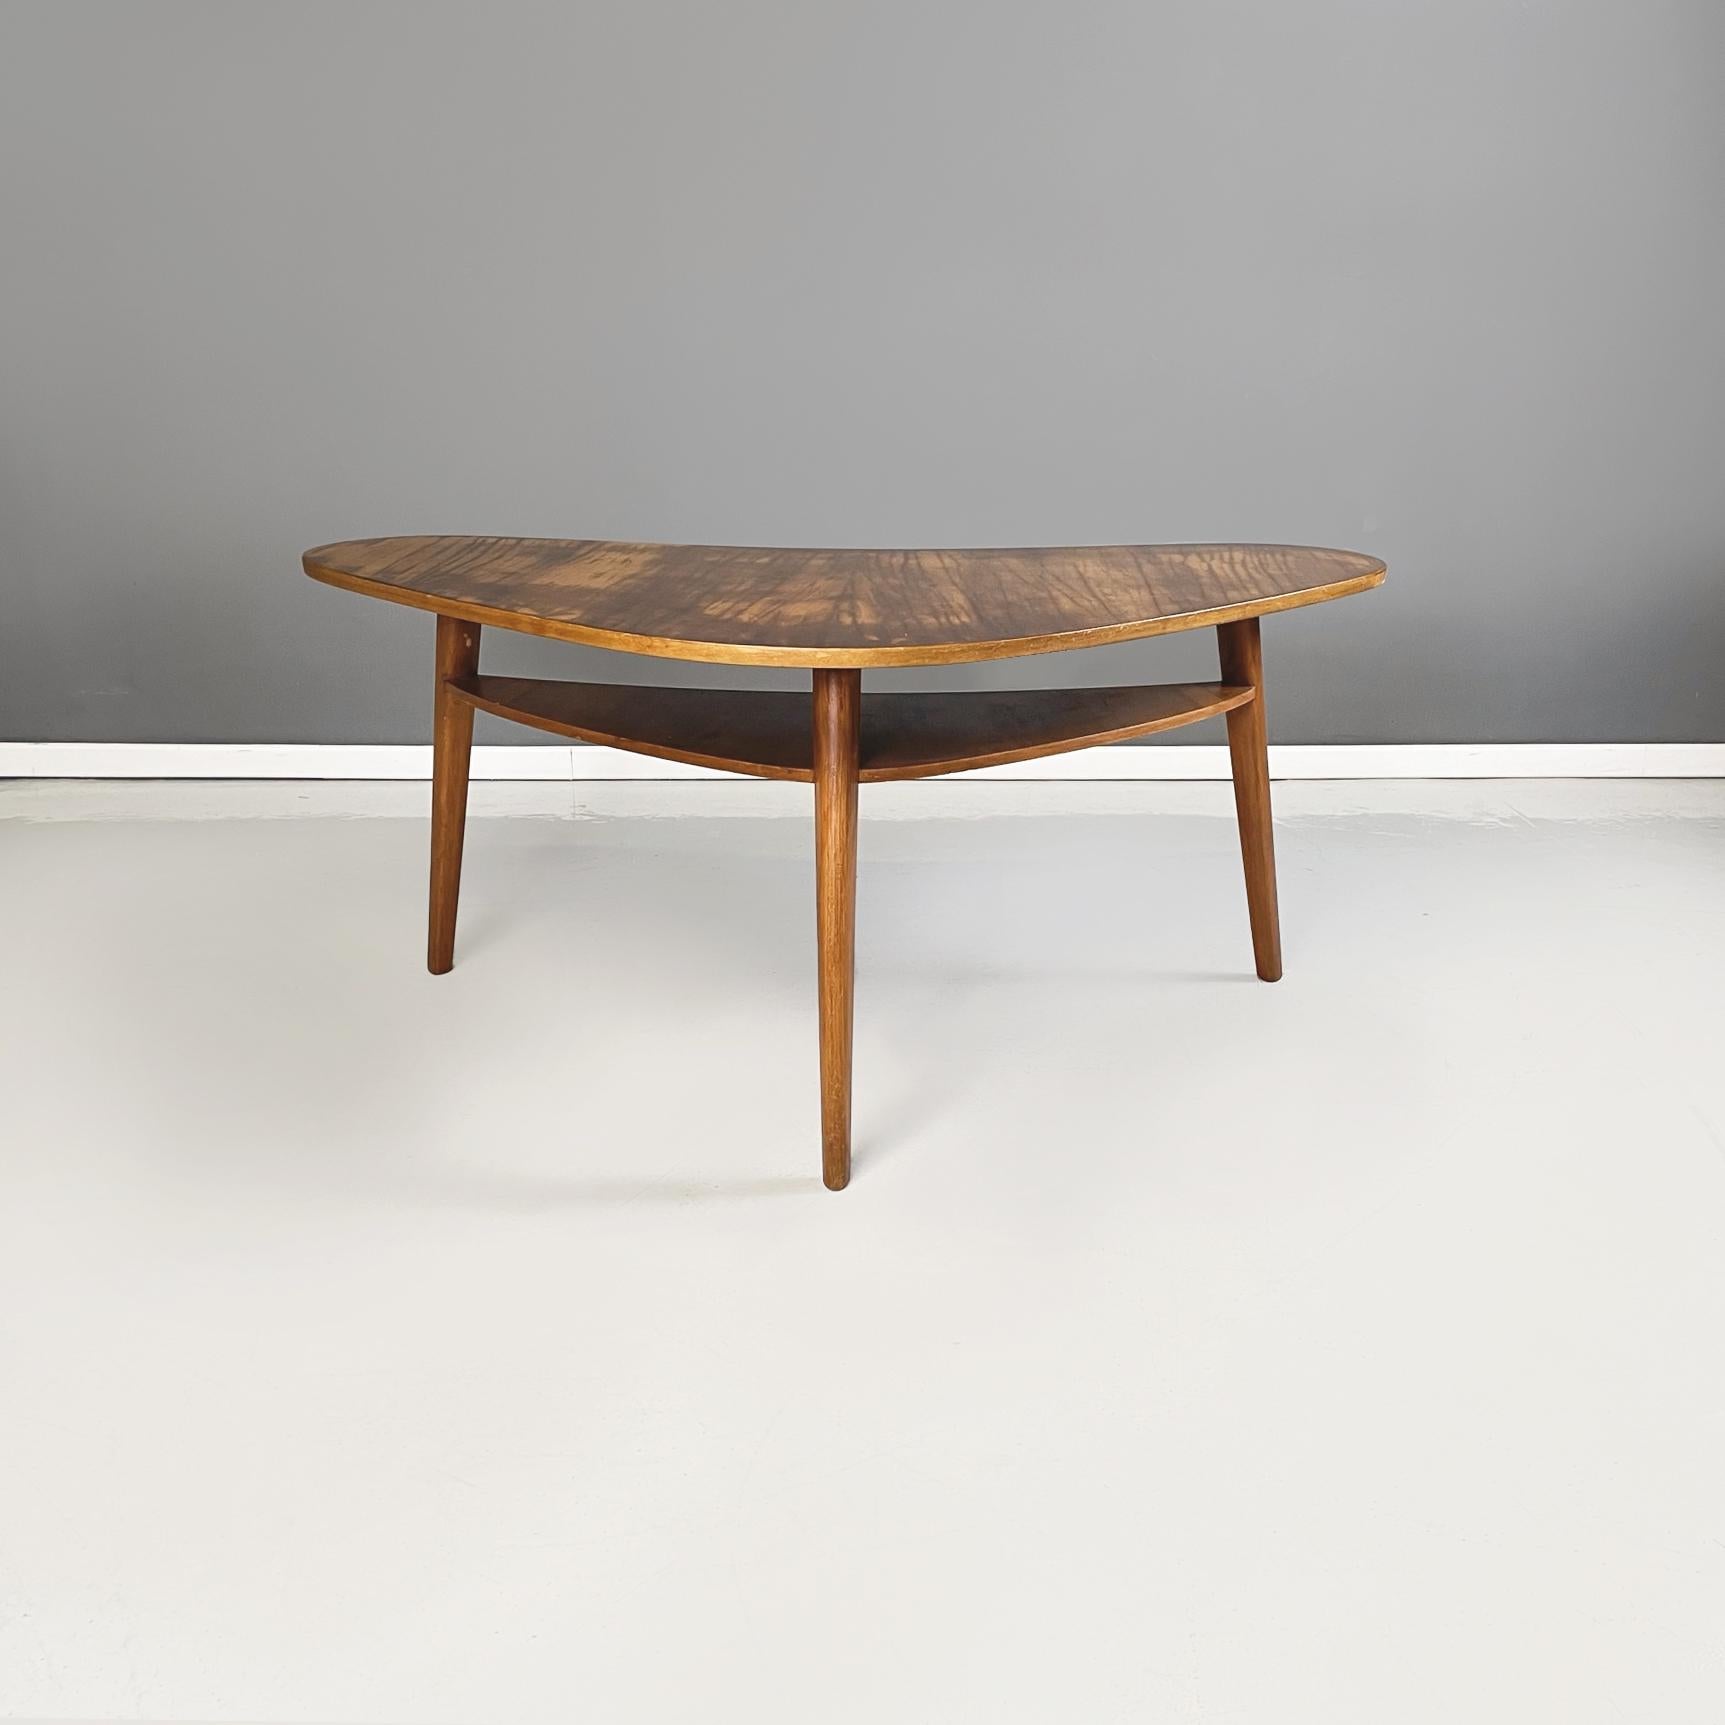 North Europa midcentury Triangular coffe table with double shelves in solid wood, 1960s
Coffee table with double top in solid wood. The larger upper top has a rounded triangular shape. The triangular shelf below is smaller in Size and connects to